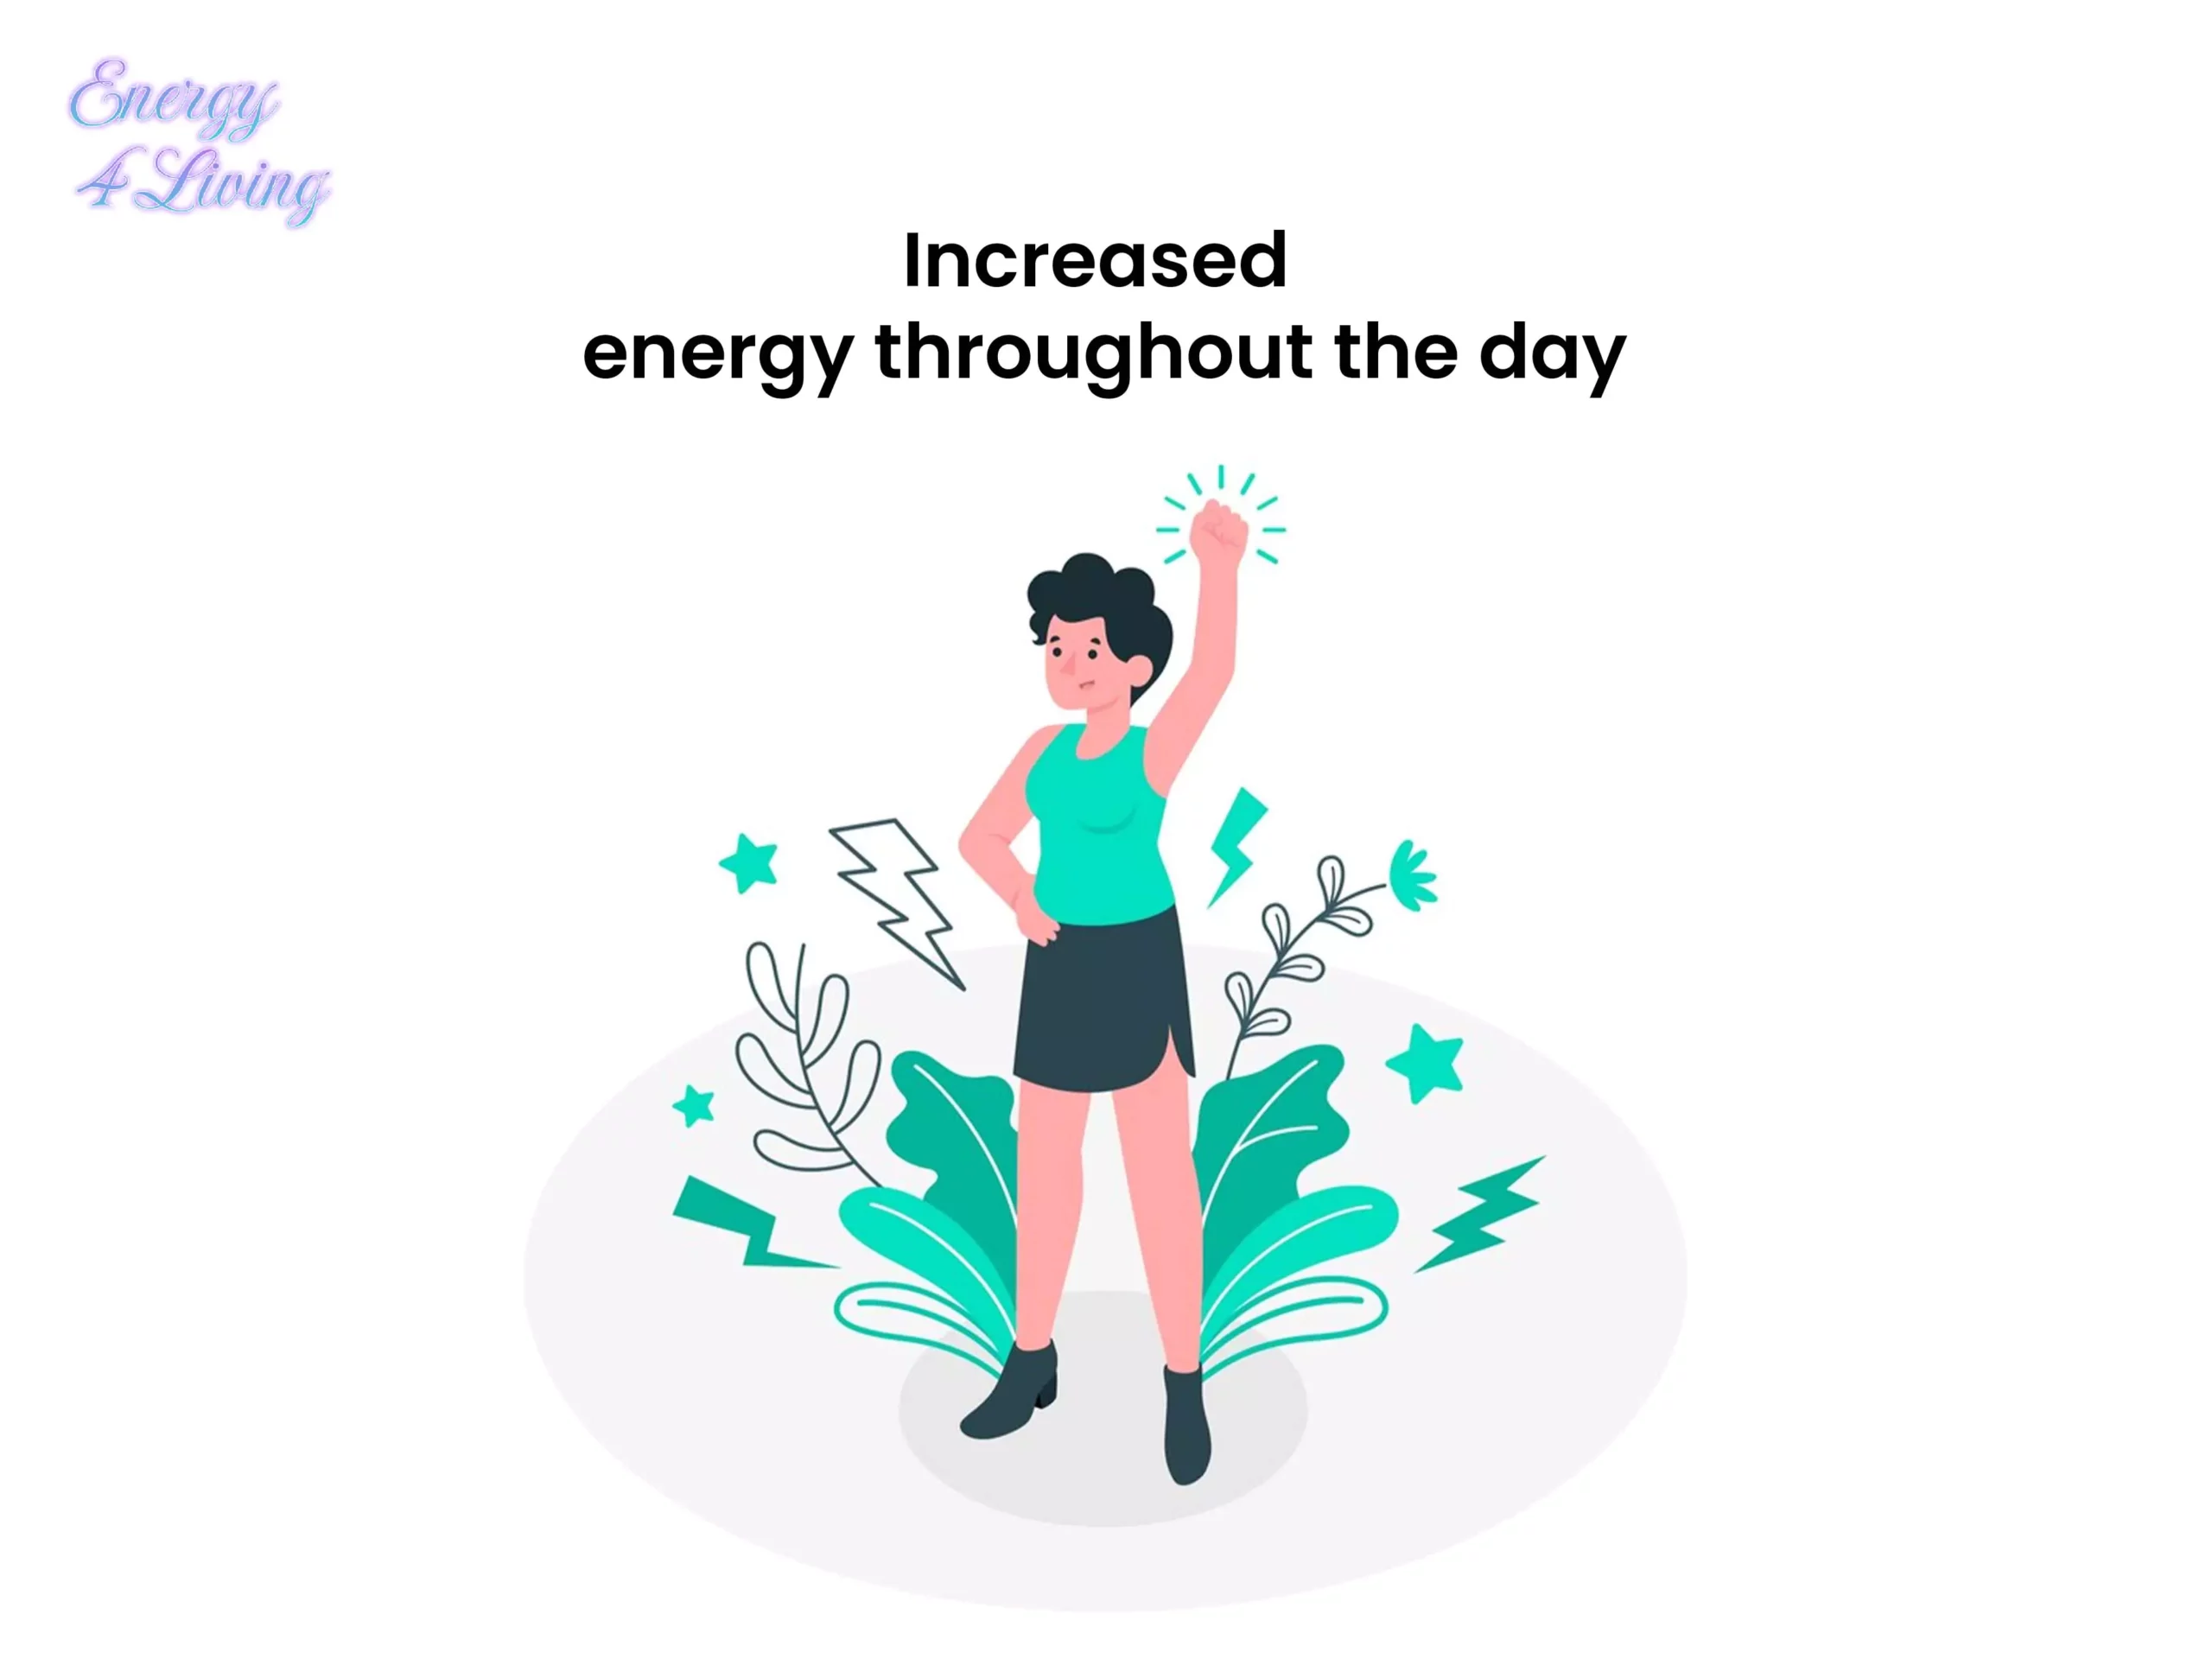 Increased energy throughout the day